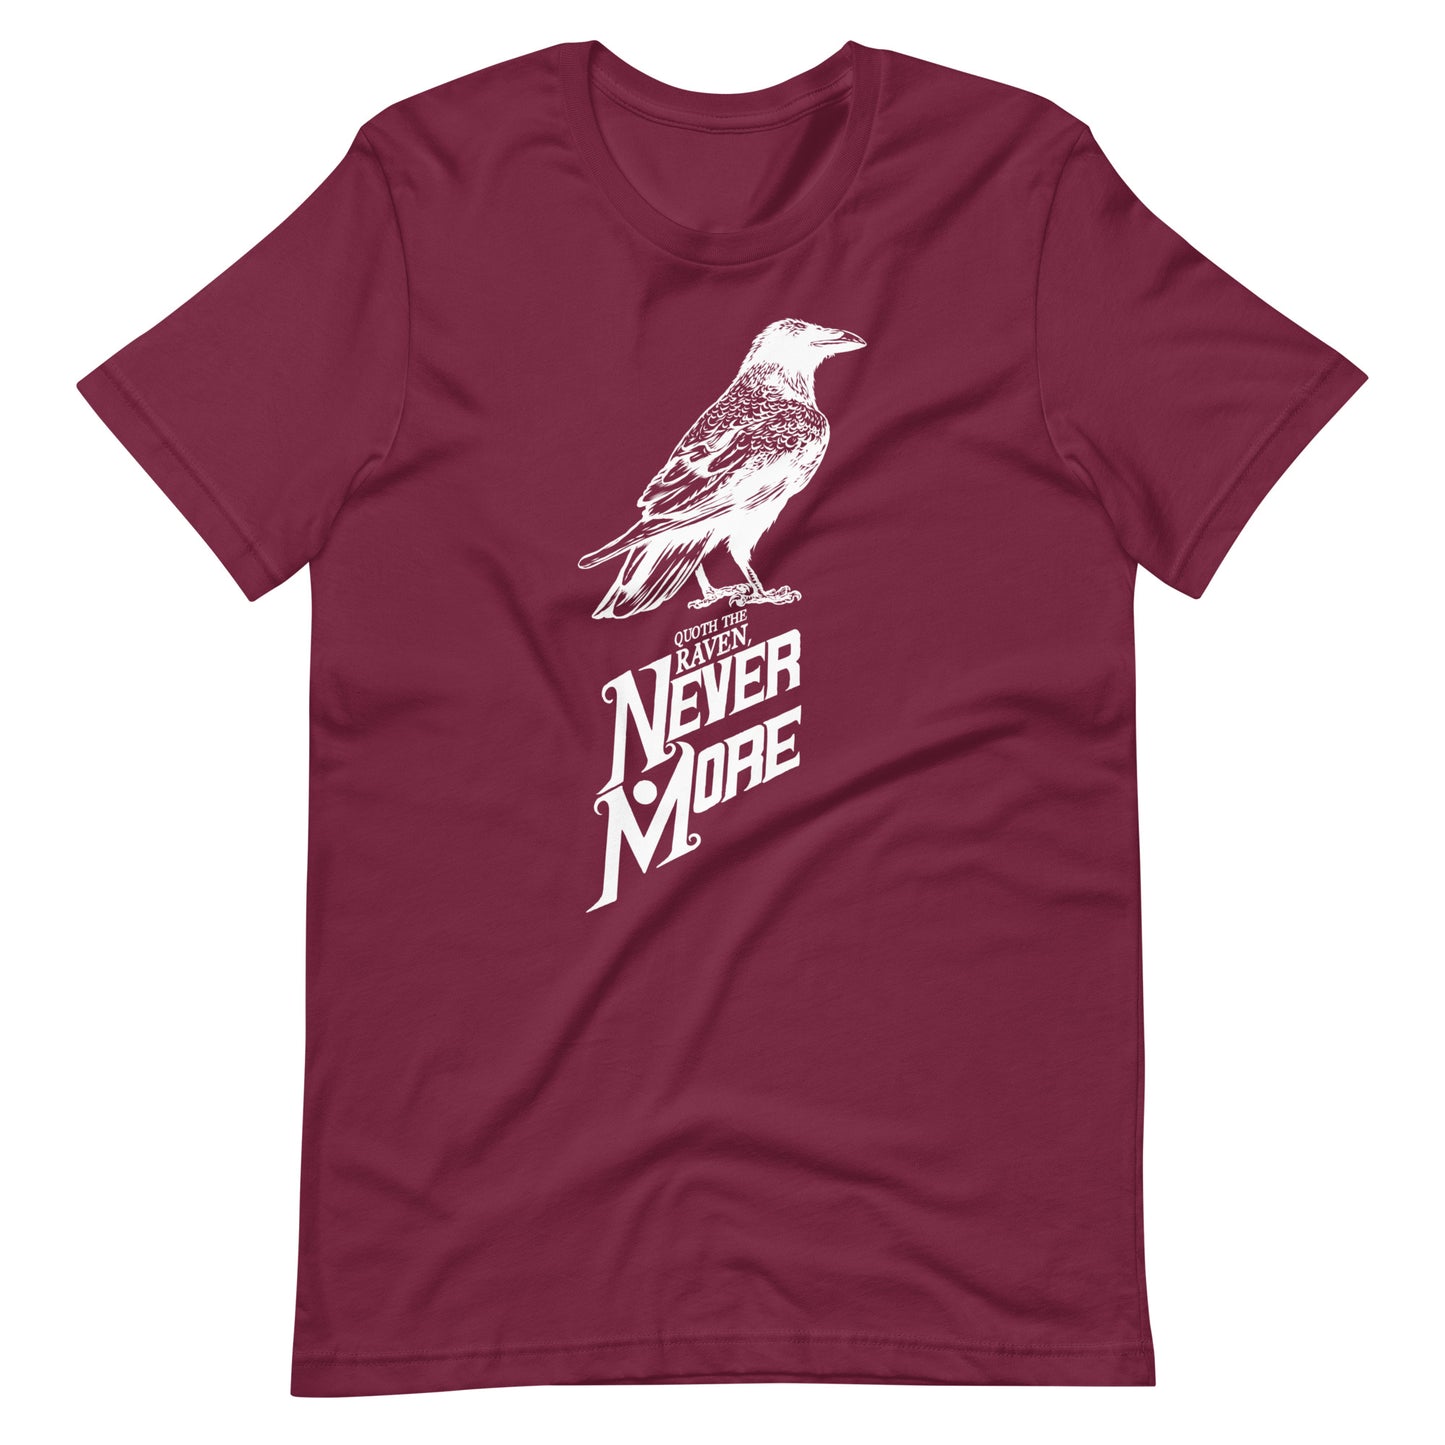 Quoth the Raven Nevermore - Men's t-shirt - Maroon Front